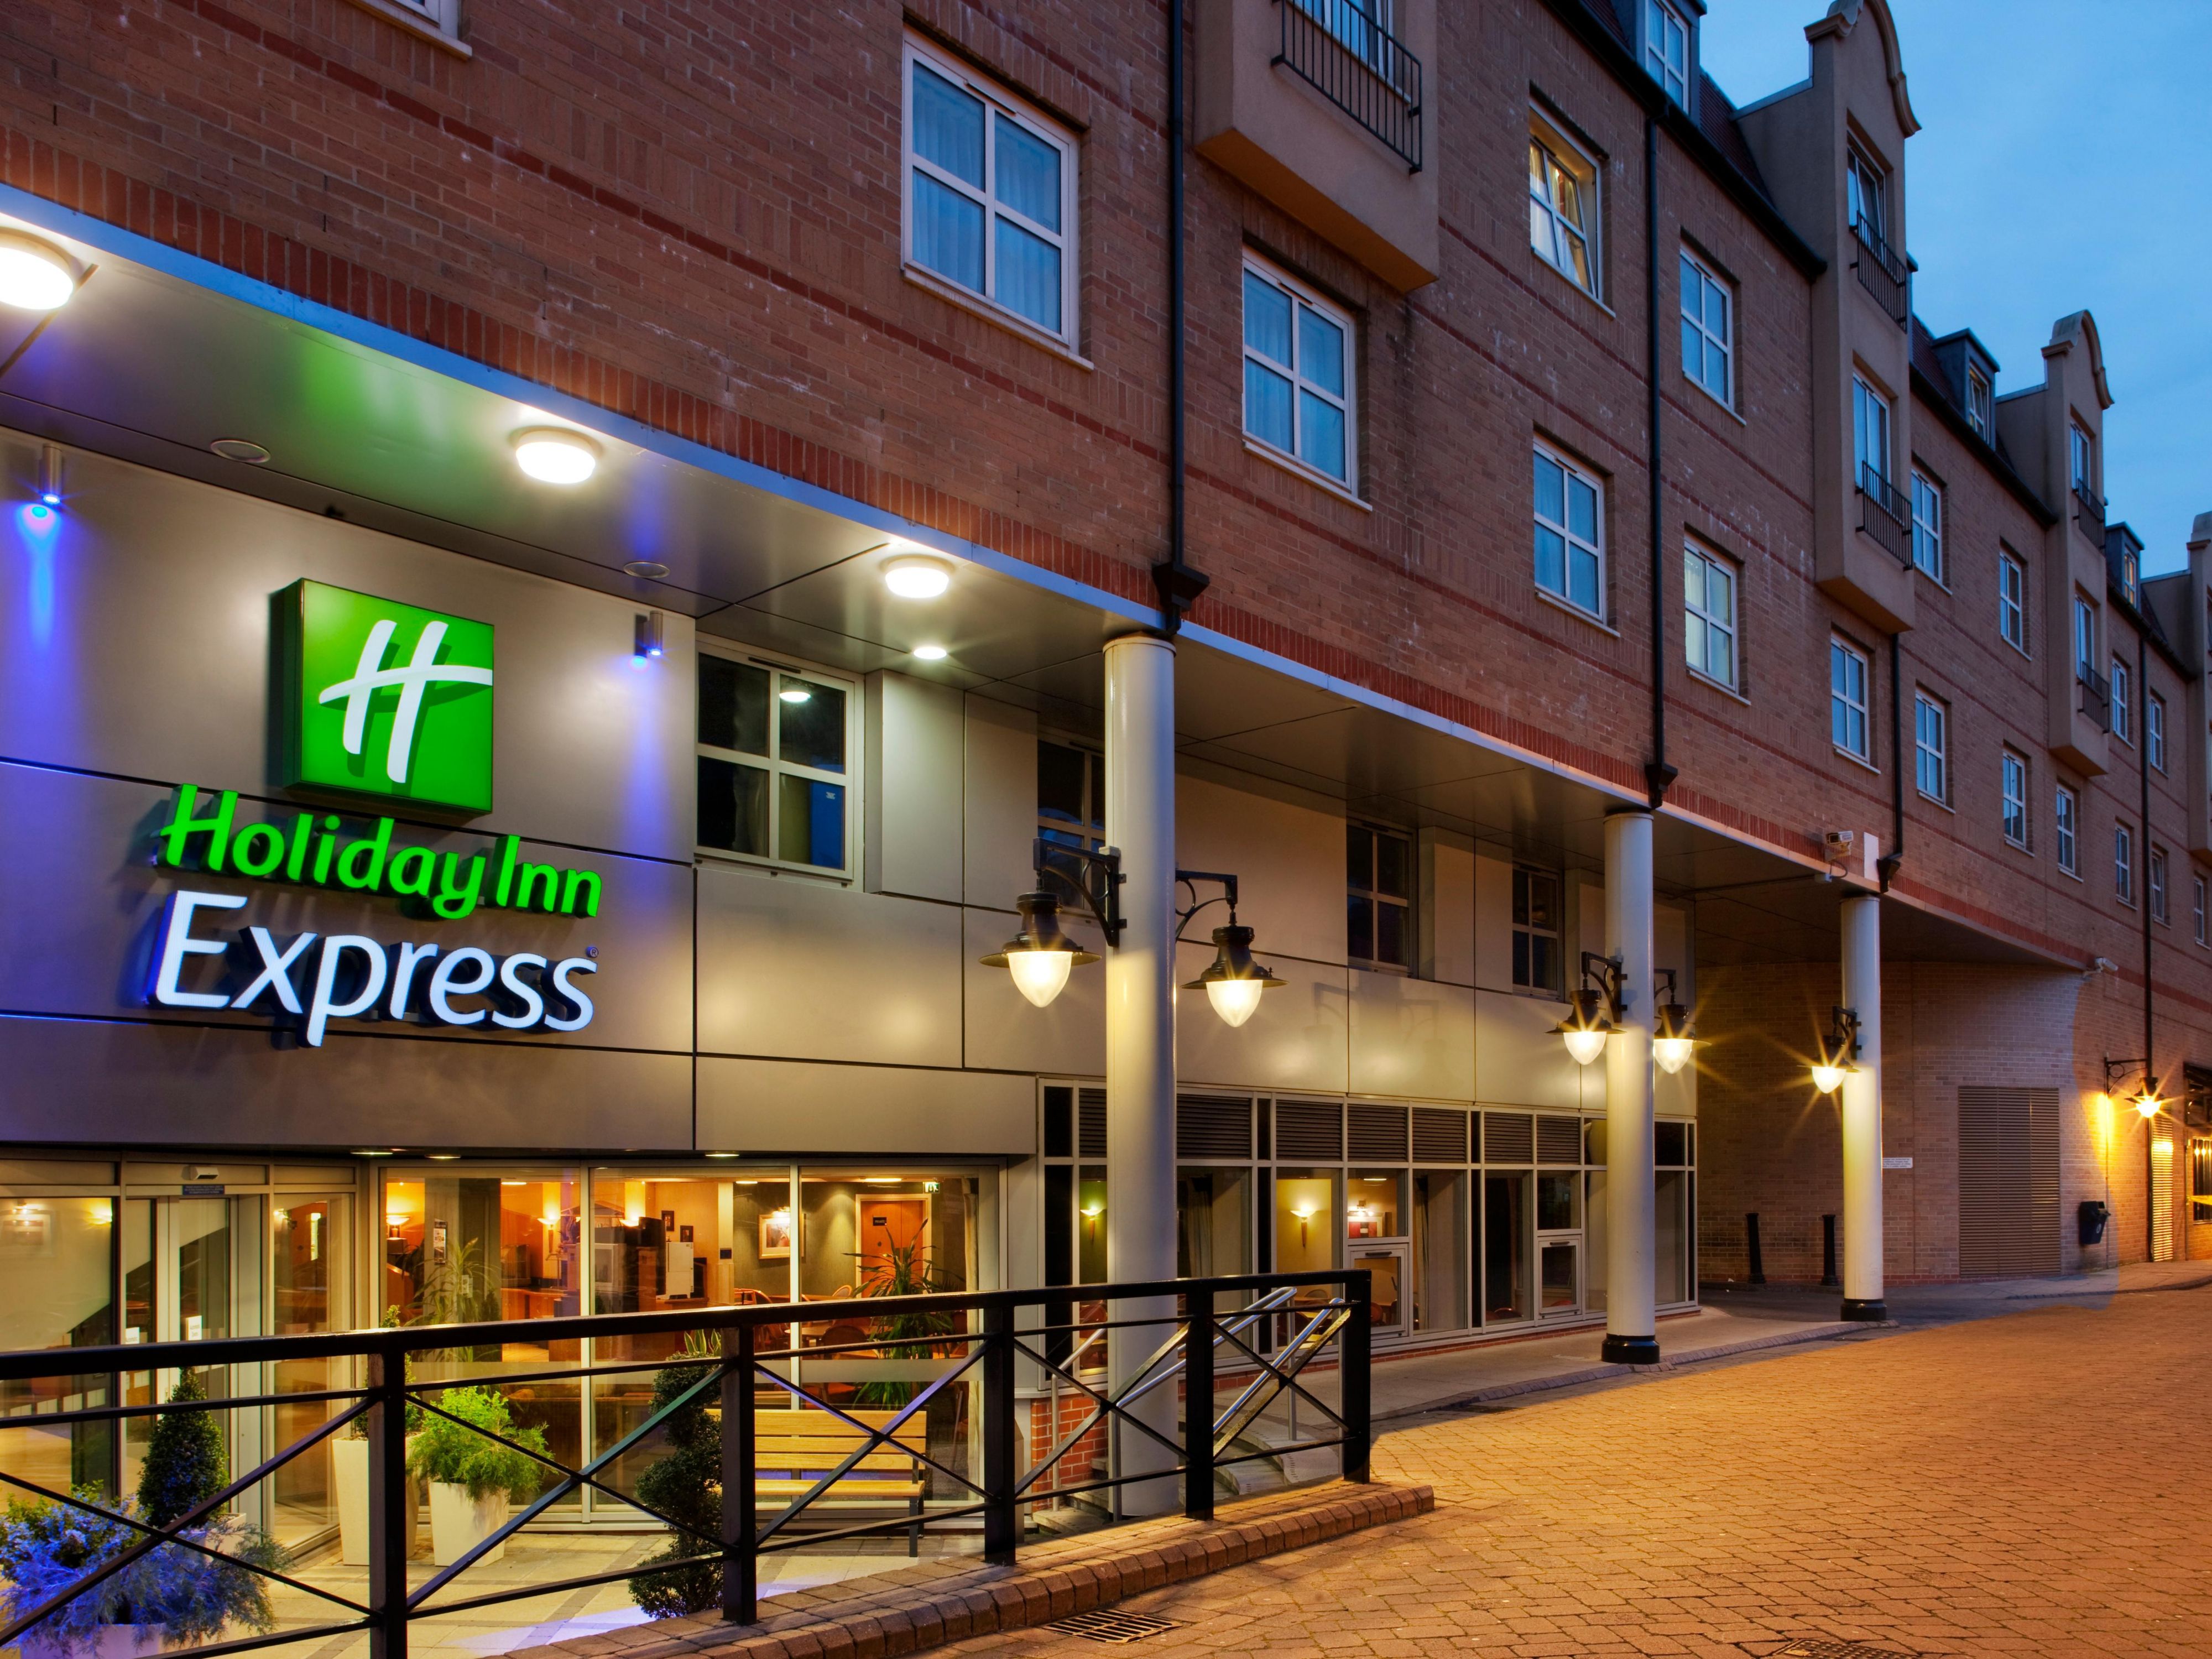 26+ nett Foto Hotel Holiday Inn Ratingen : Holiday Inn Express Hotel & Suites Norfolk Airport: 2019 ... - The hotel is conveniently situated just outside the düsseldorf international airport , only 4 km from the main terminal.